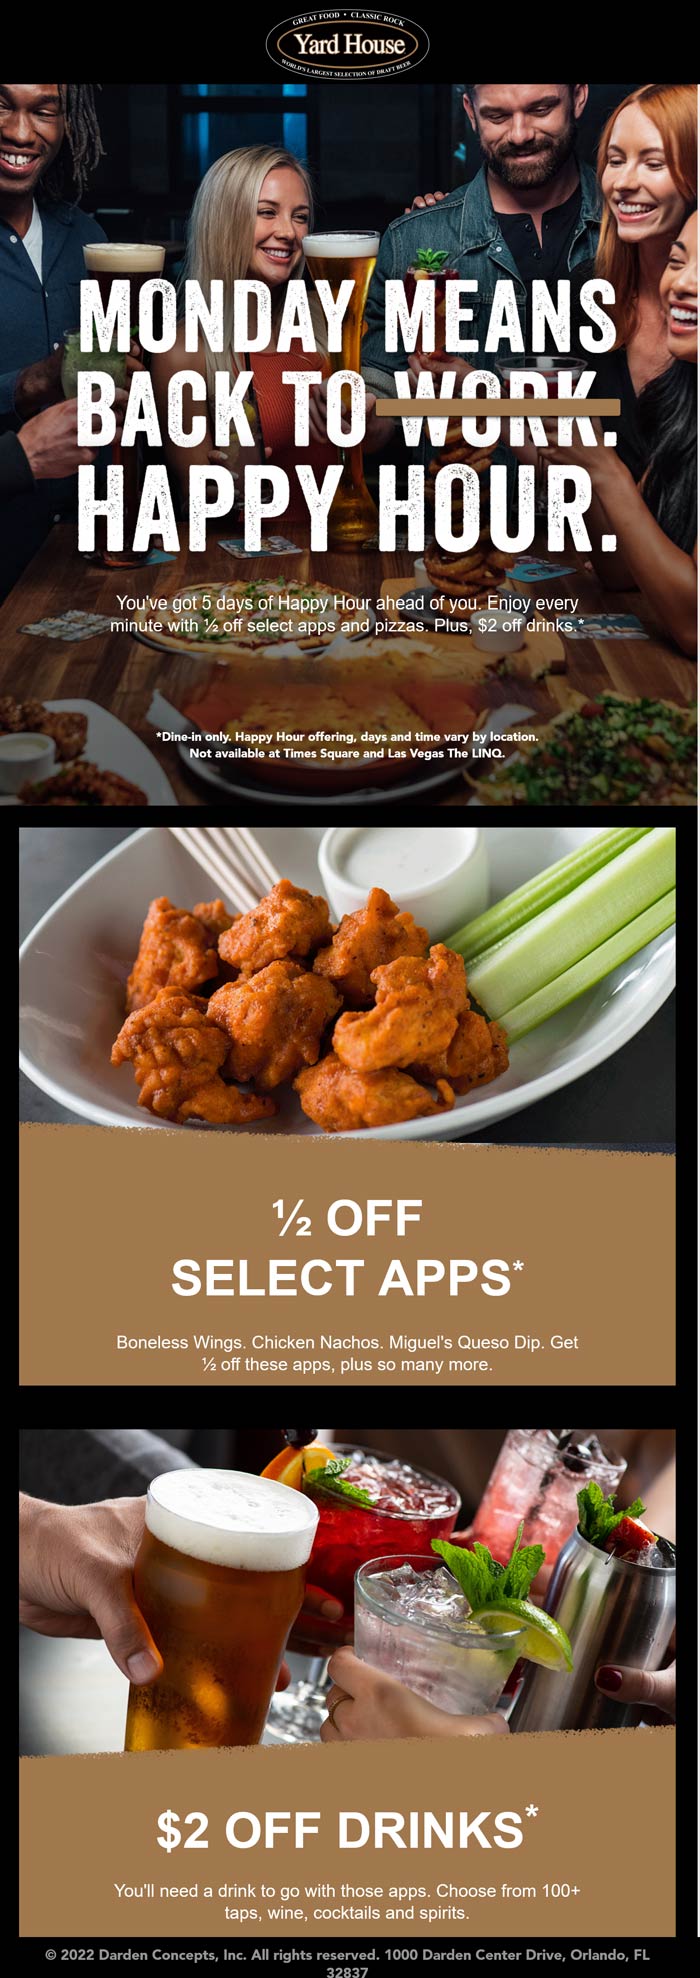 Yard House restaurants Coupon  50% off appetizers & $2 off drinks 3-6p weekdays at Yard House restaurants #yardhouse 